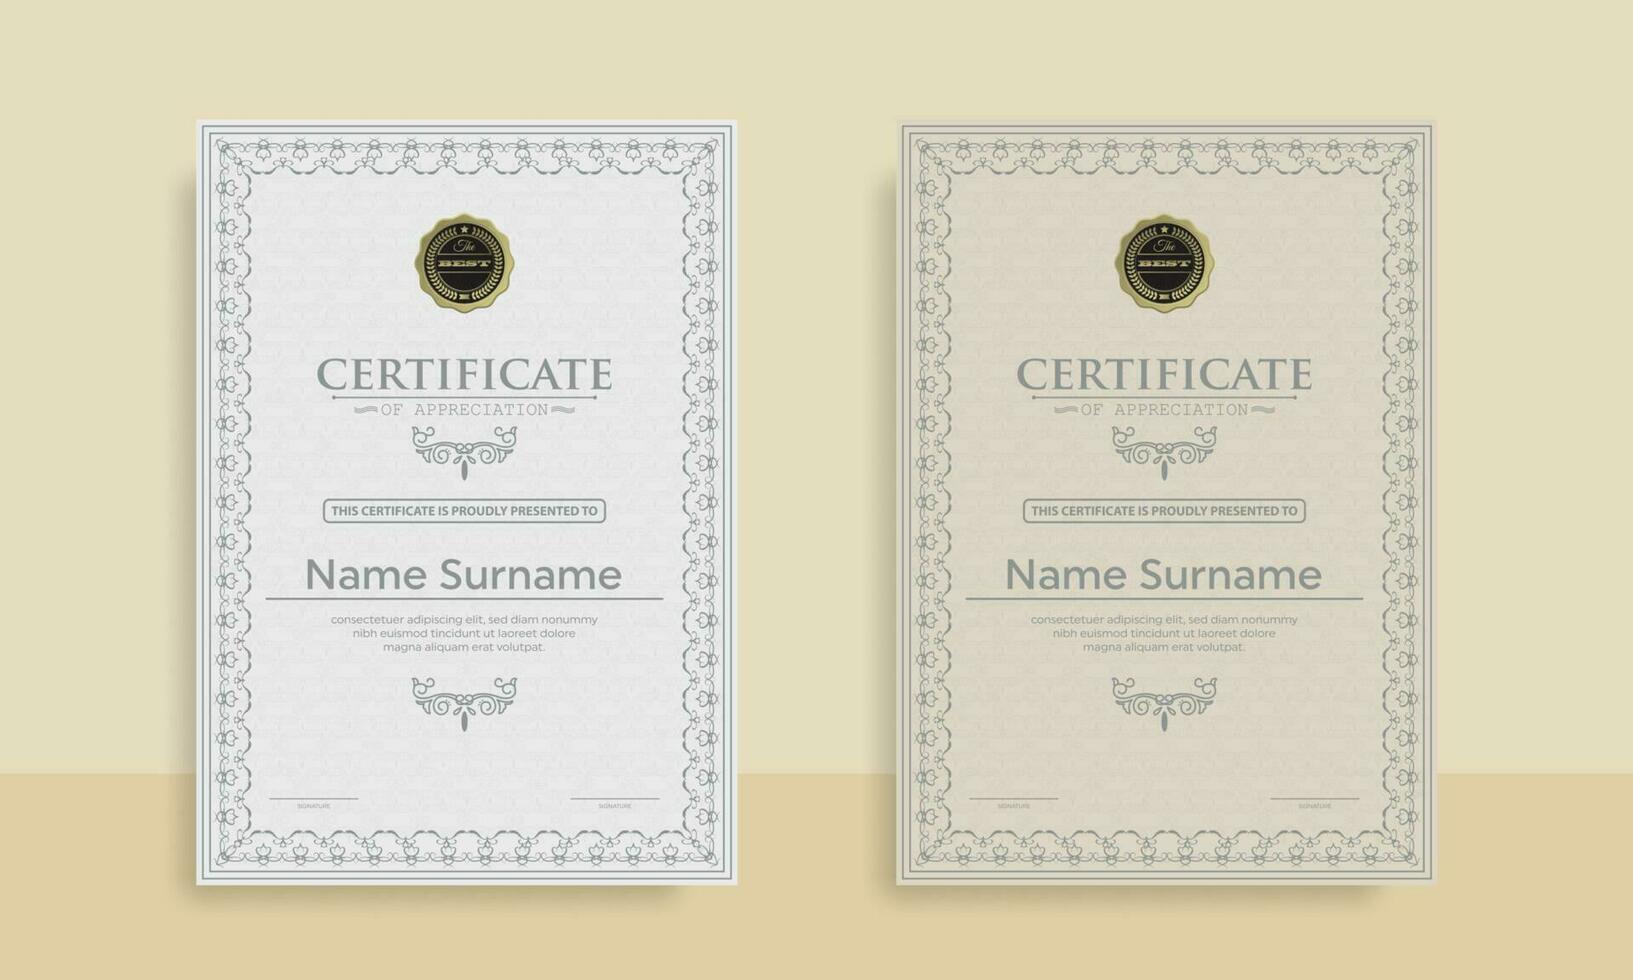 Diploma Certificate of achievement template in vector with Thai outline. Award Templates, achievements for companies, Best Prize Documents. Illustration Templates